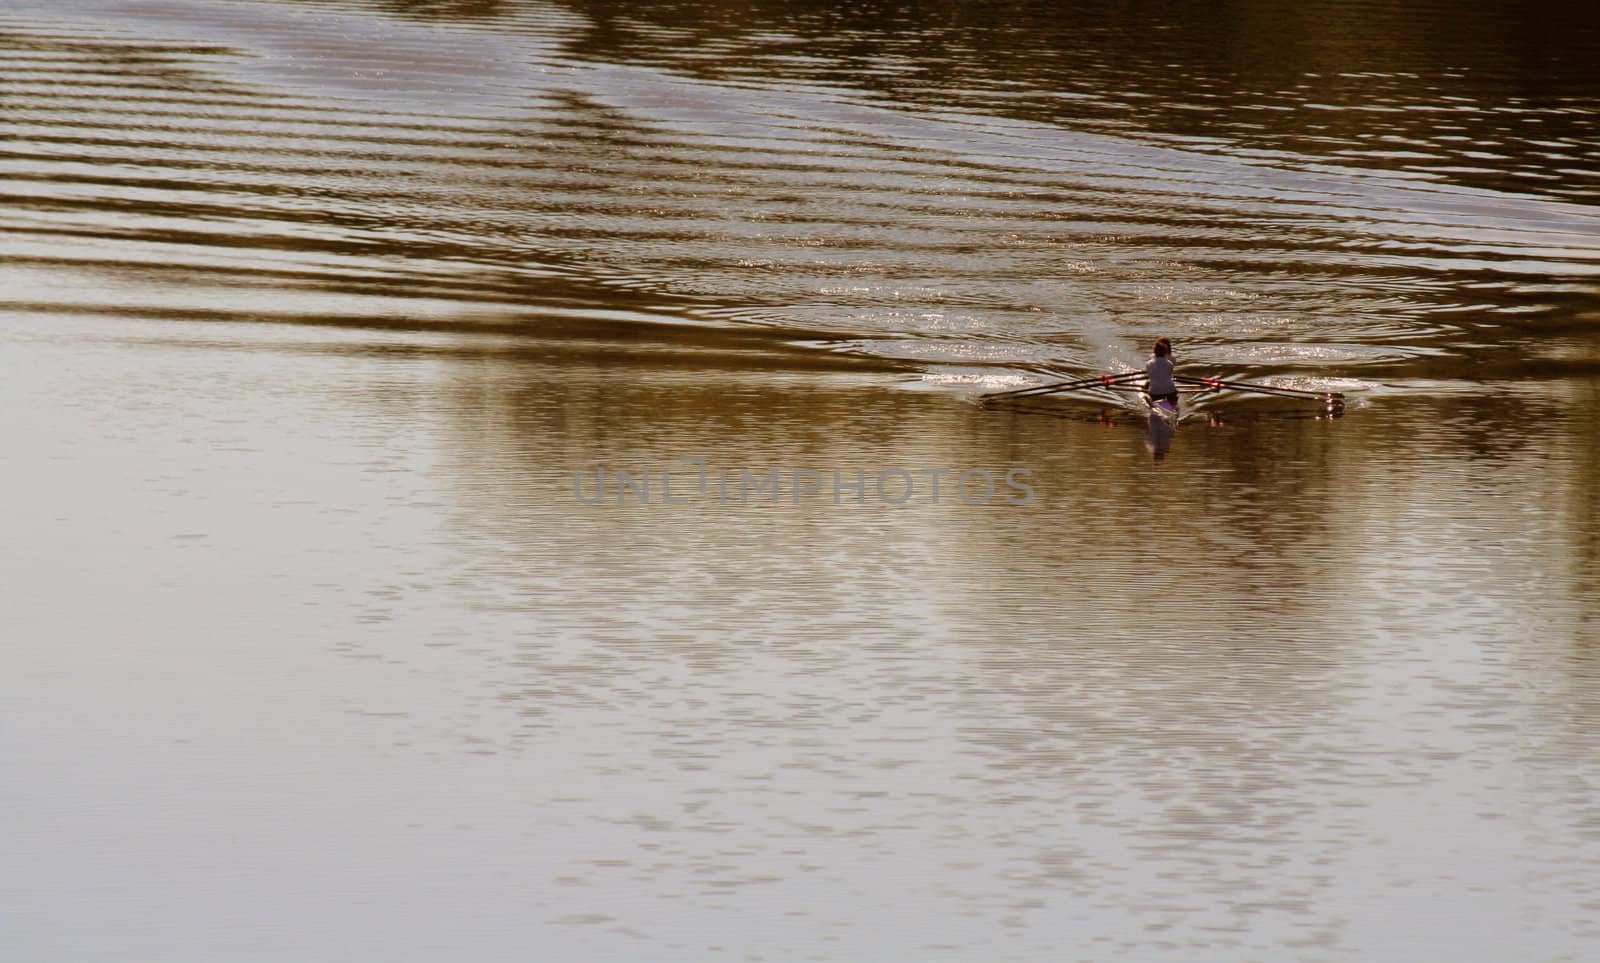 A kayakers skimming across the river.